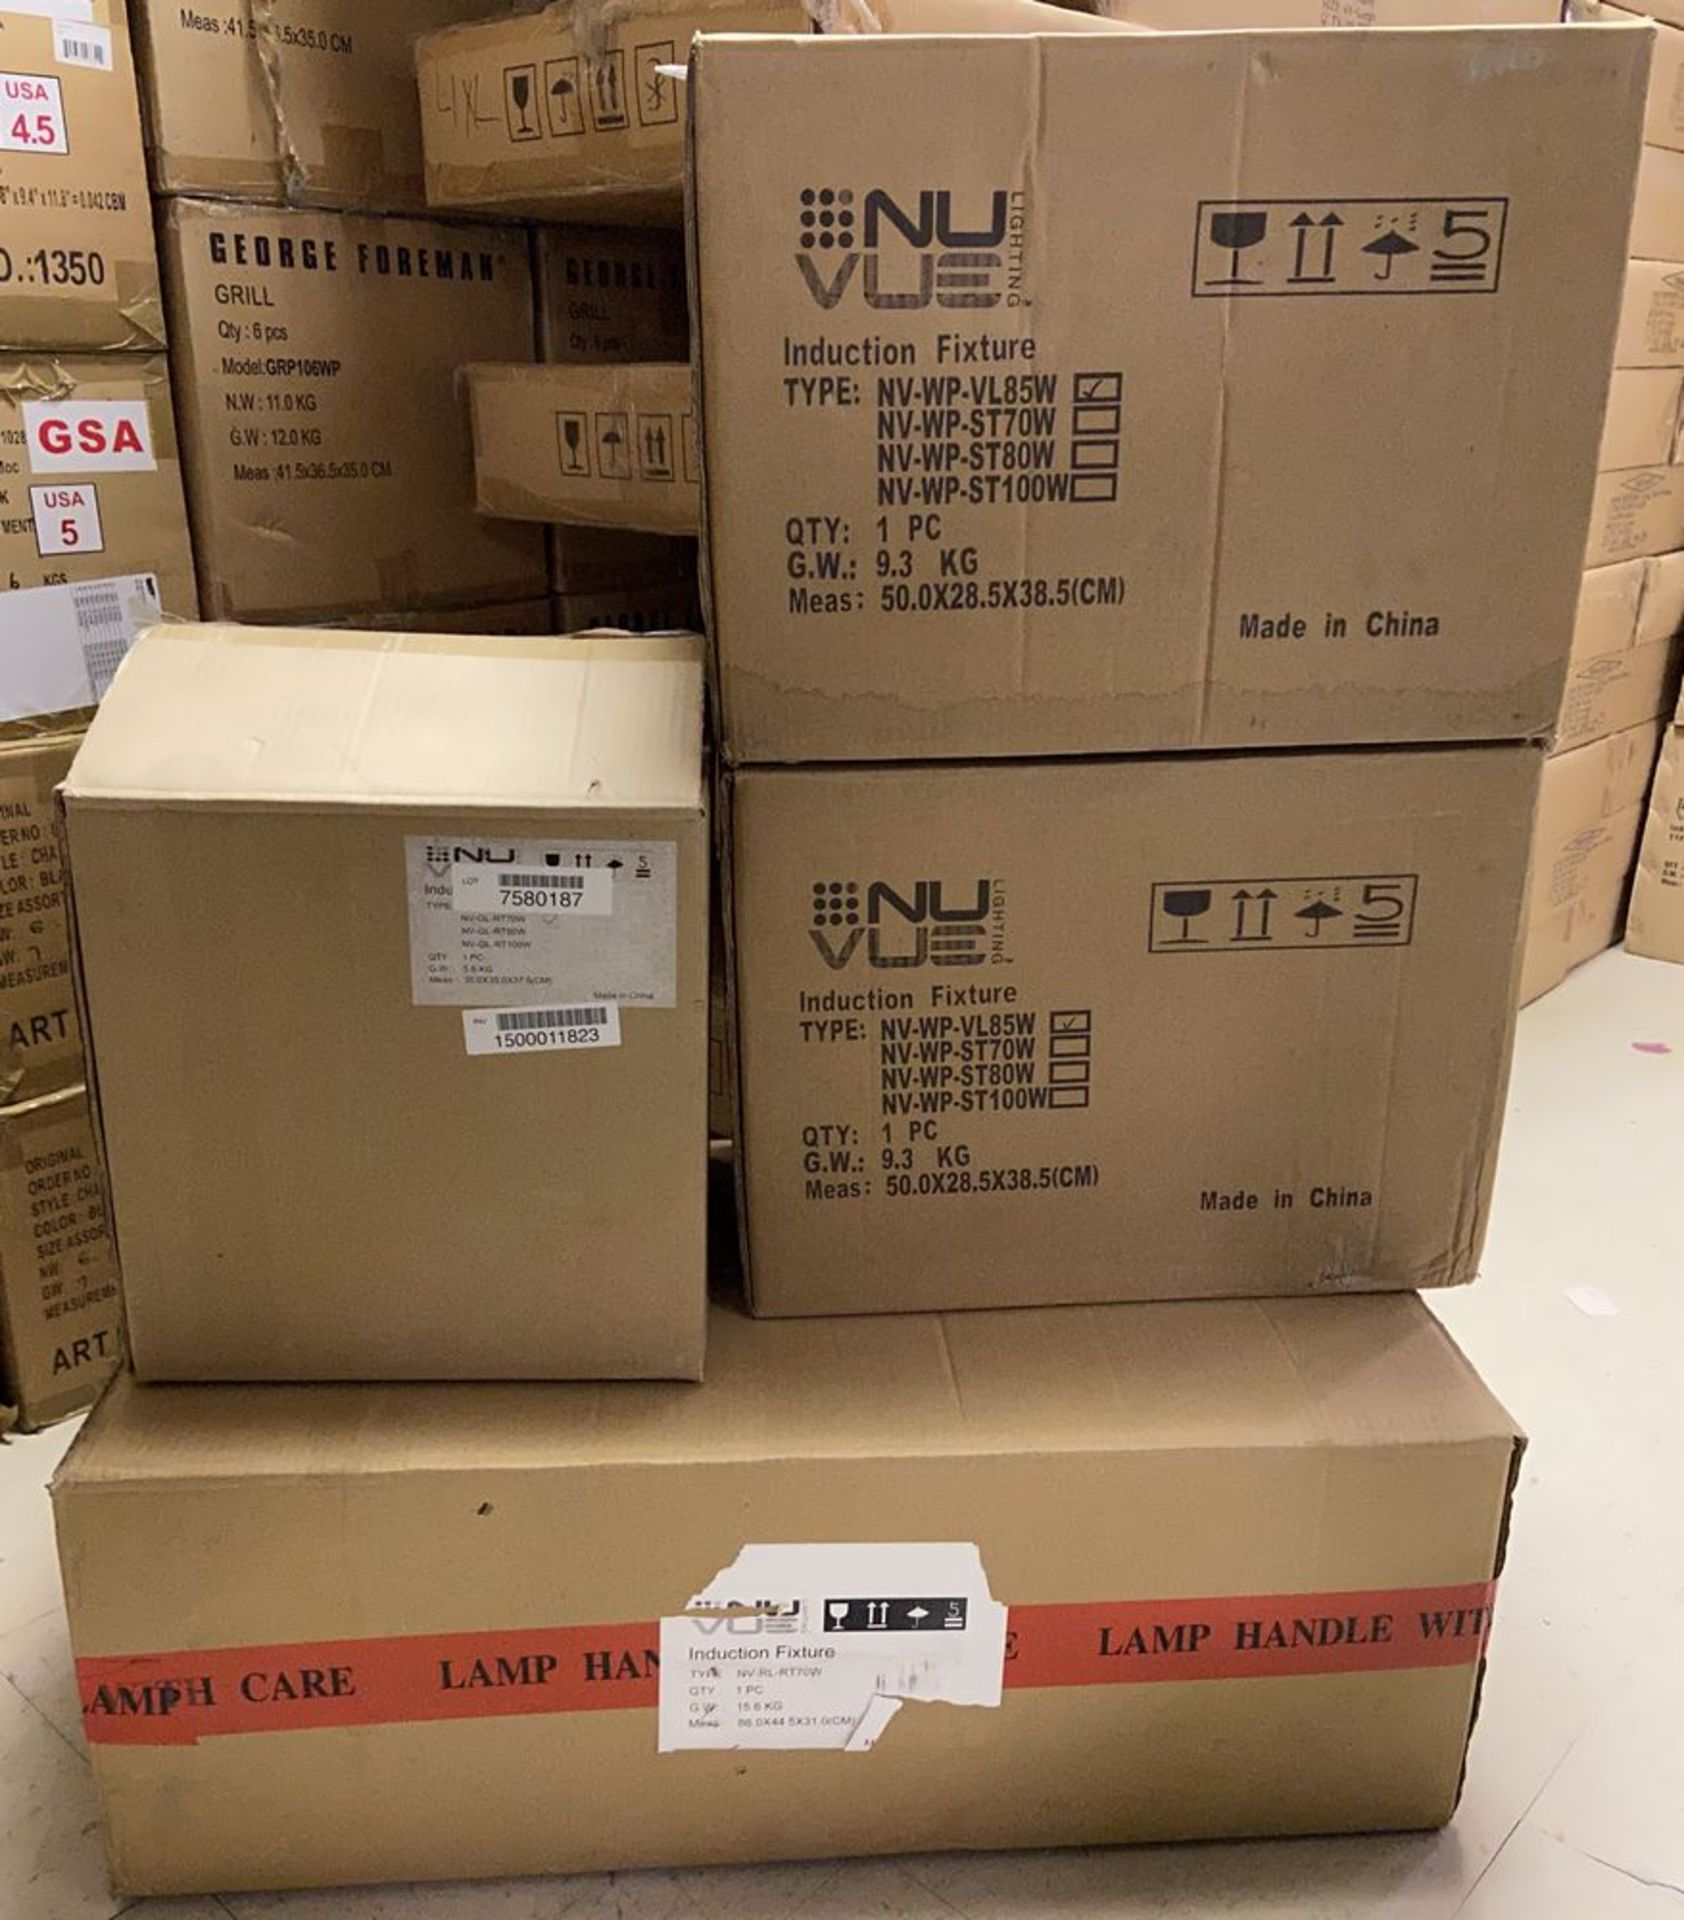 4 New in Box - Nu Vue Induction Lighting Fixtures, NV-WP-VL85W, NV-GL-RT70W, NV-RL-RT70W - Image 2 of 4